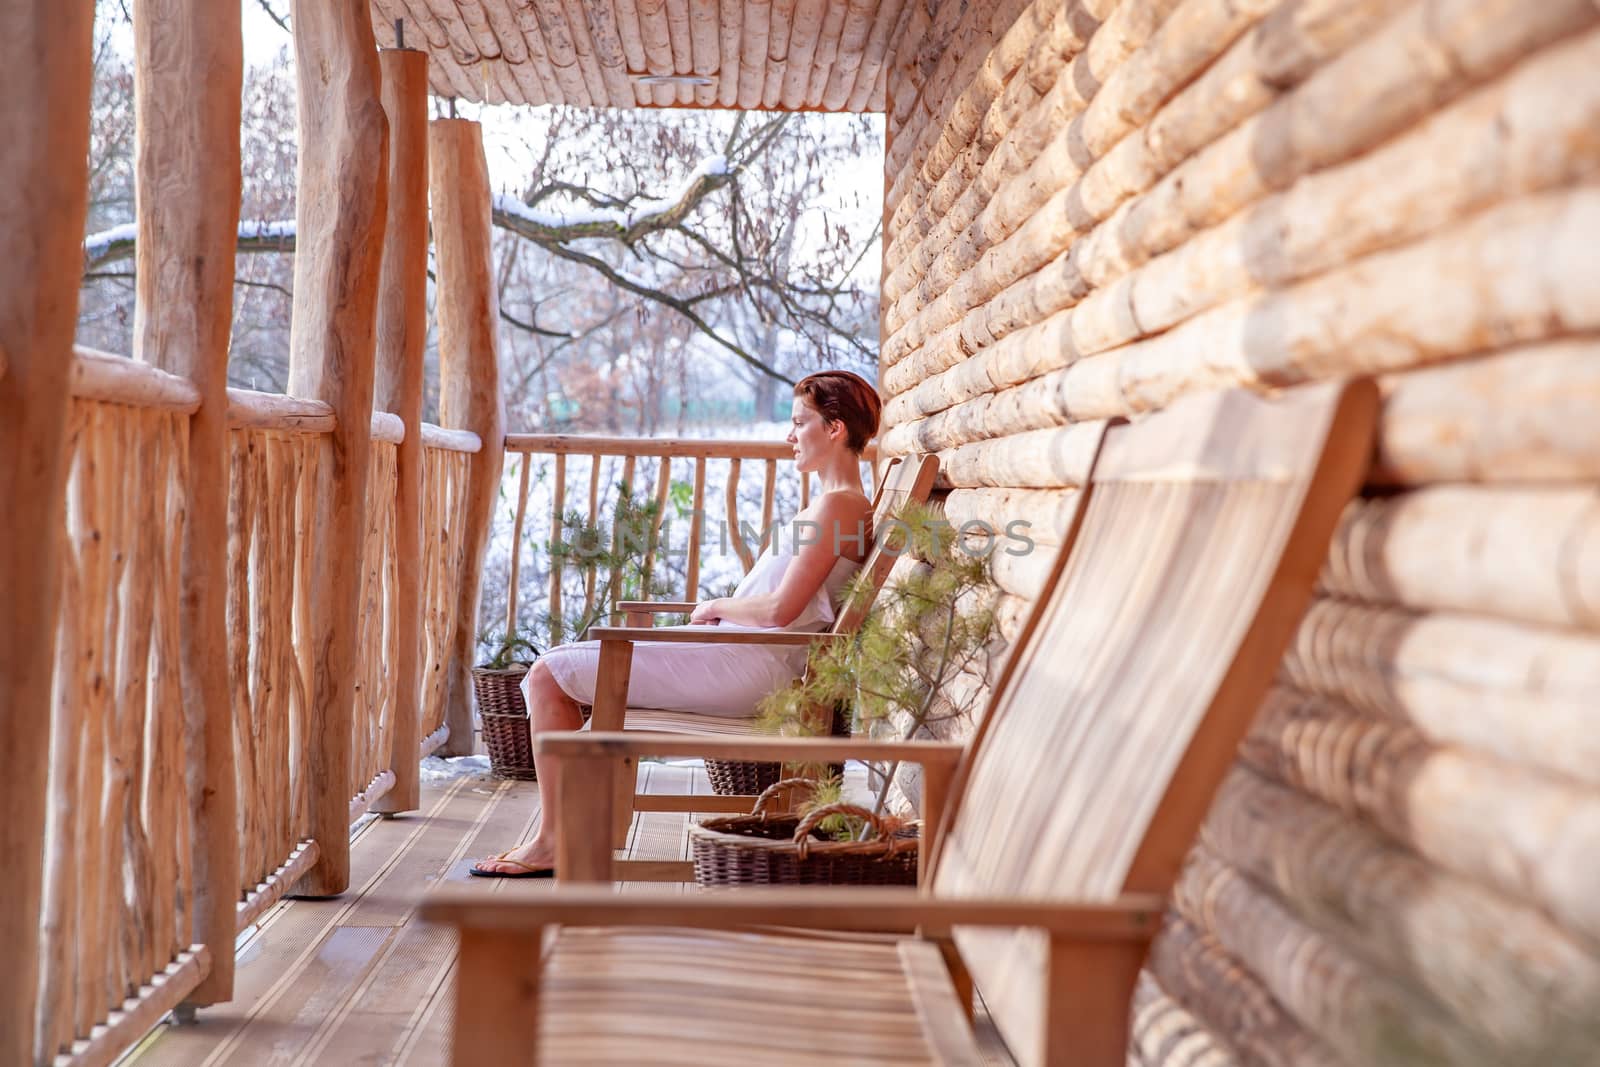 woman relaxes after sauna in a wooden log cabin in winter.